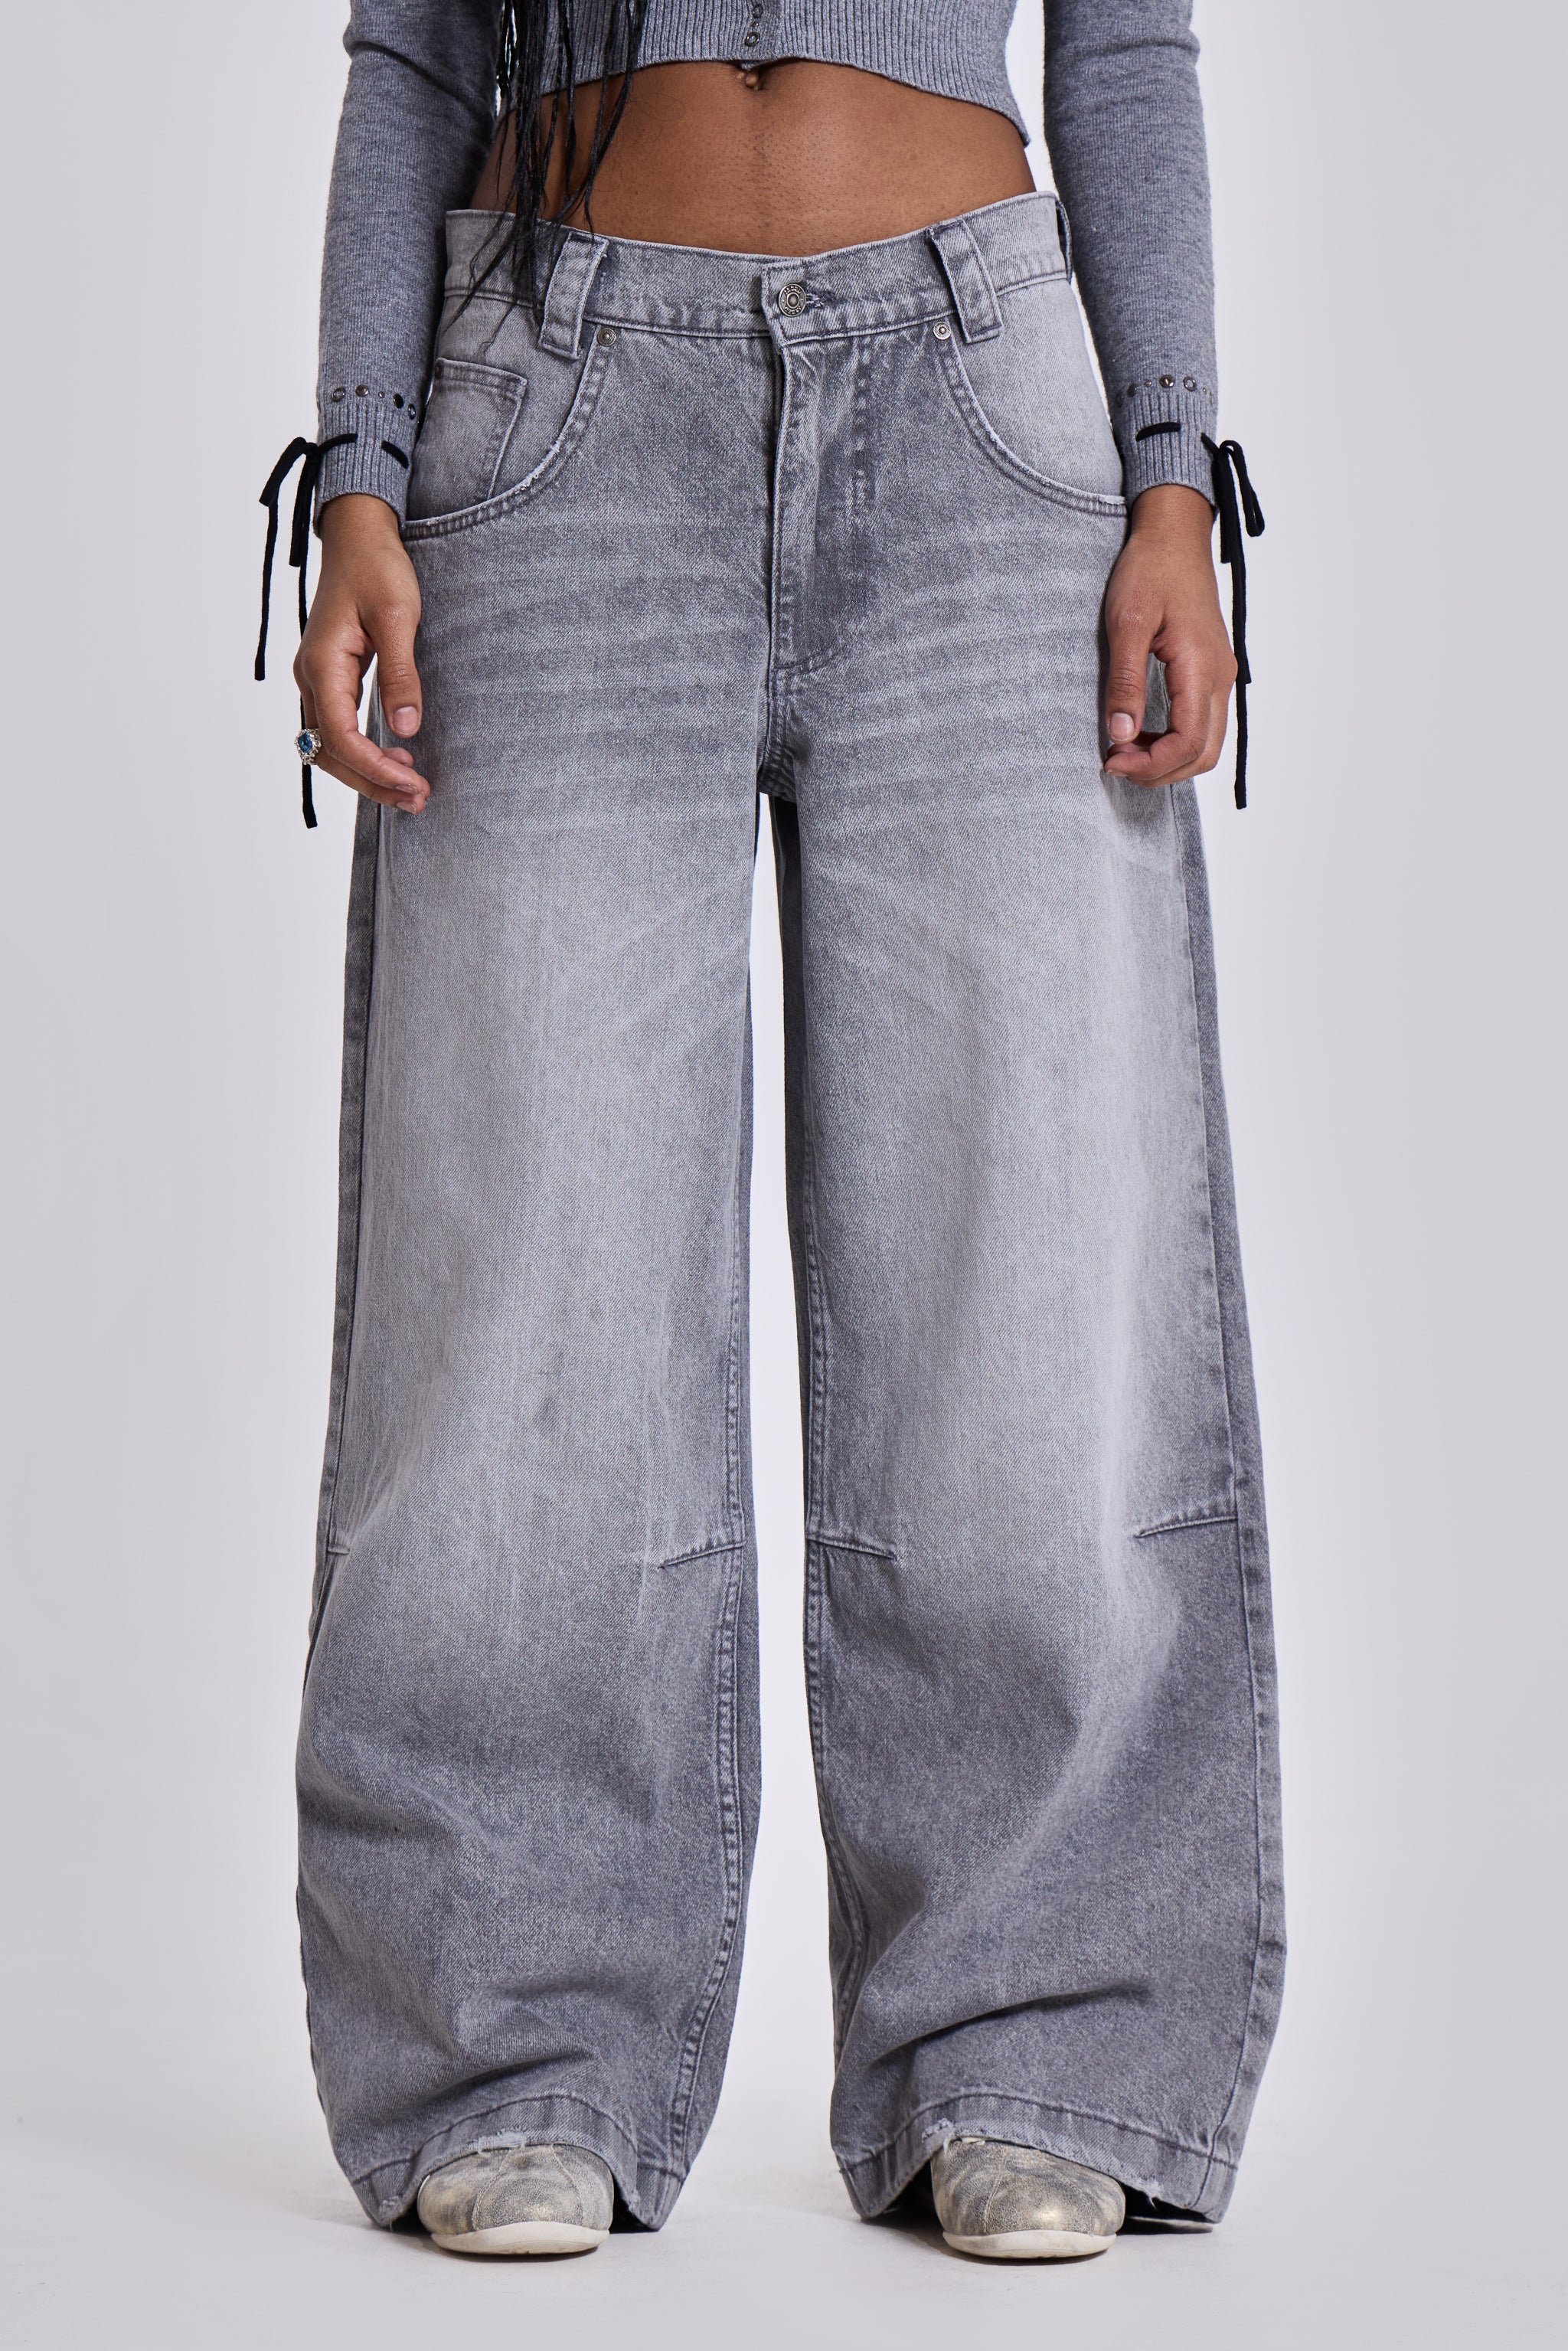 Jaded London LIGHT GREY WASHED RAZOR - Relaxed fit jeans - light